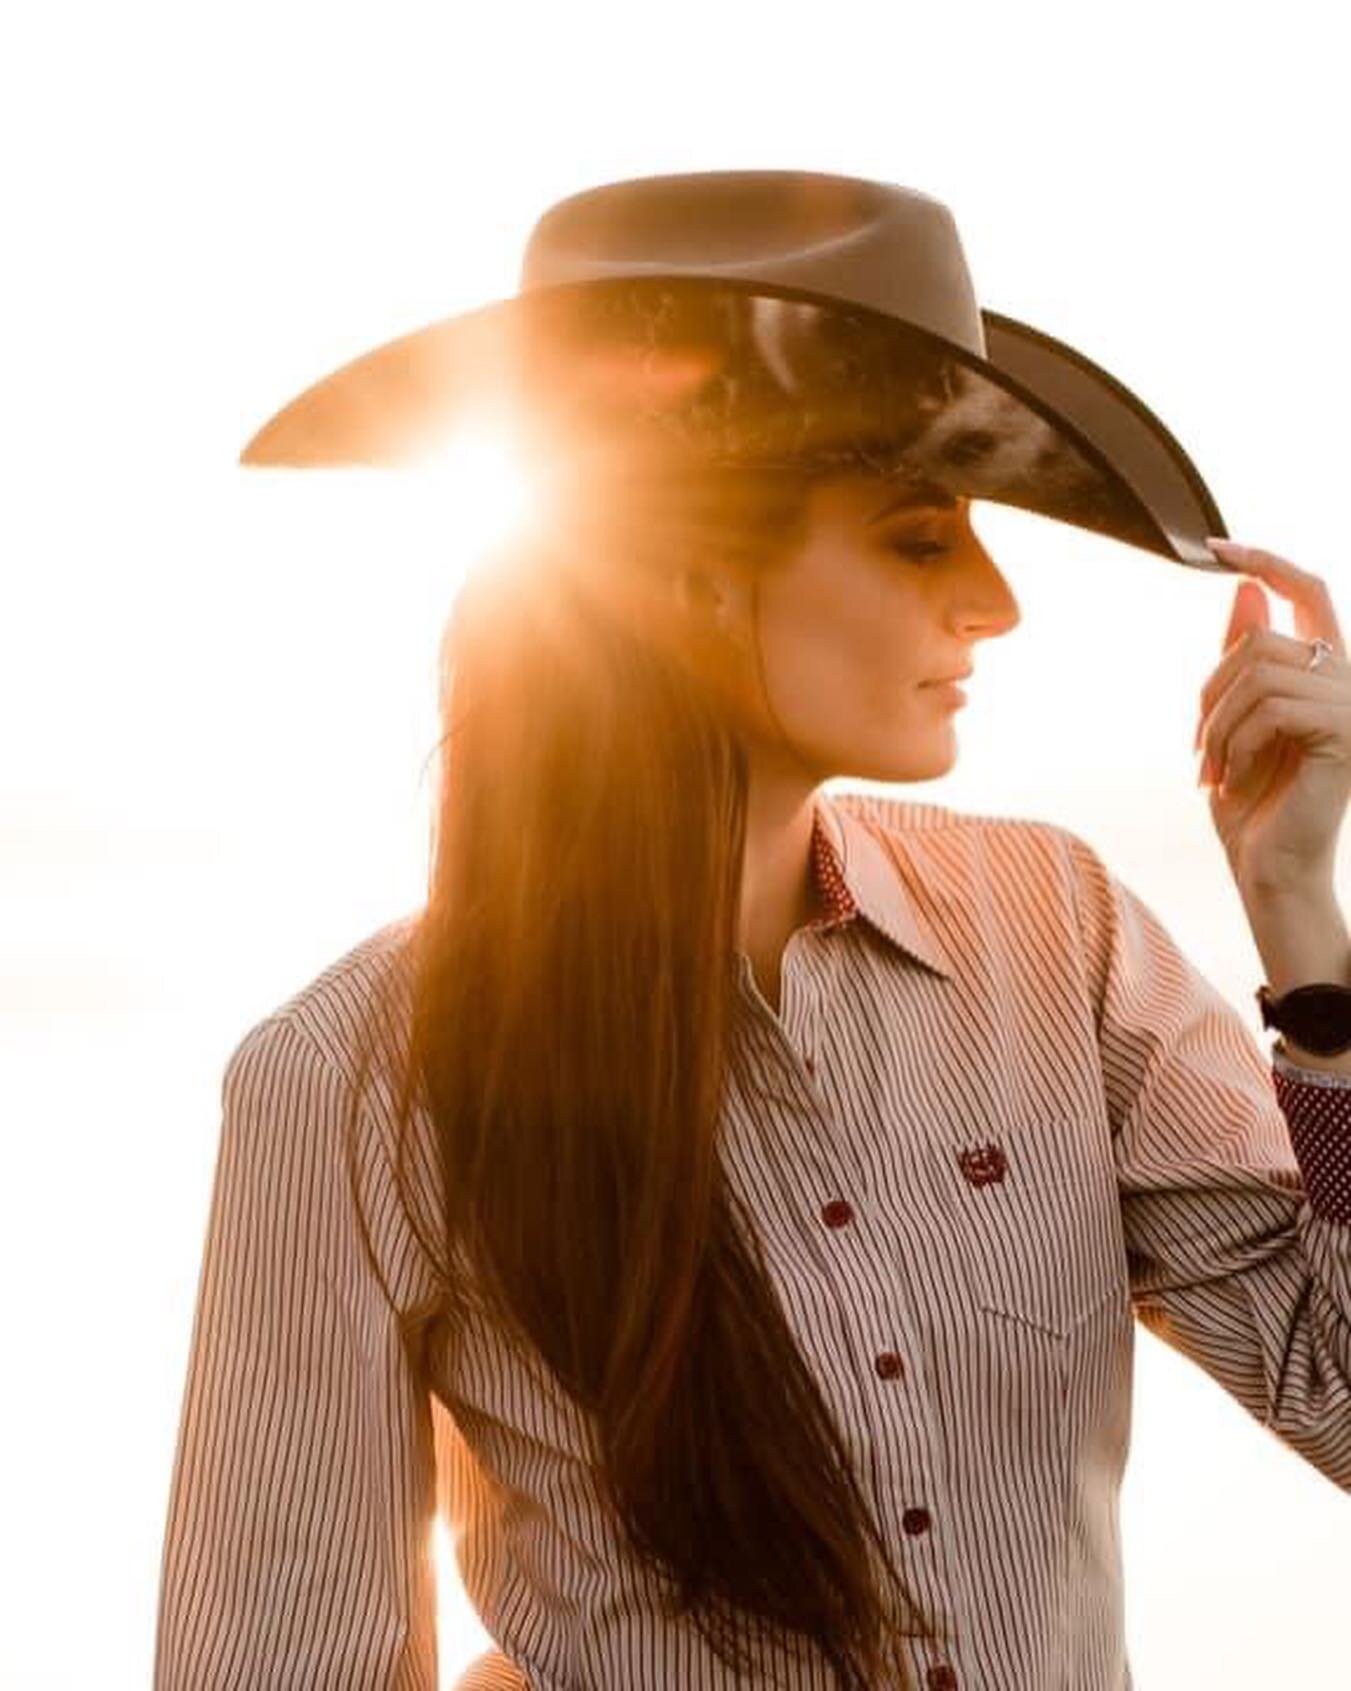 INTERNATIONAL WOMENS DAY 
.
To the individuals, businesses, and brands that continue to build and support women in all facets of all ages. 
.
#internationalwomensday #cowgirl #rodeo #thatwesternlife